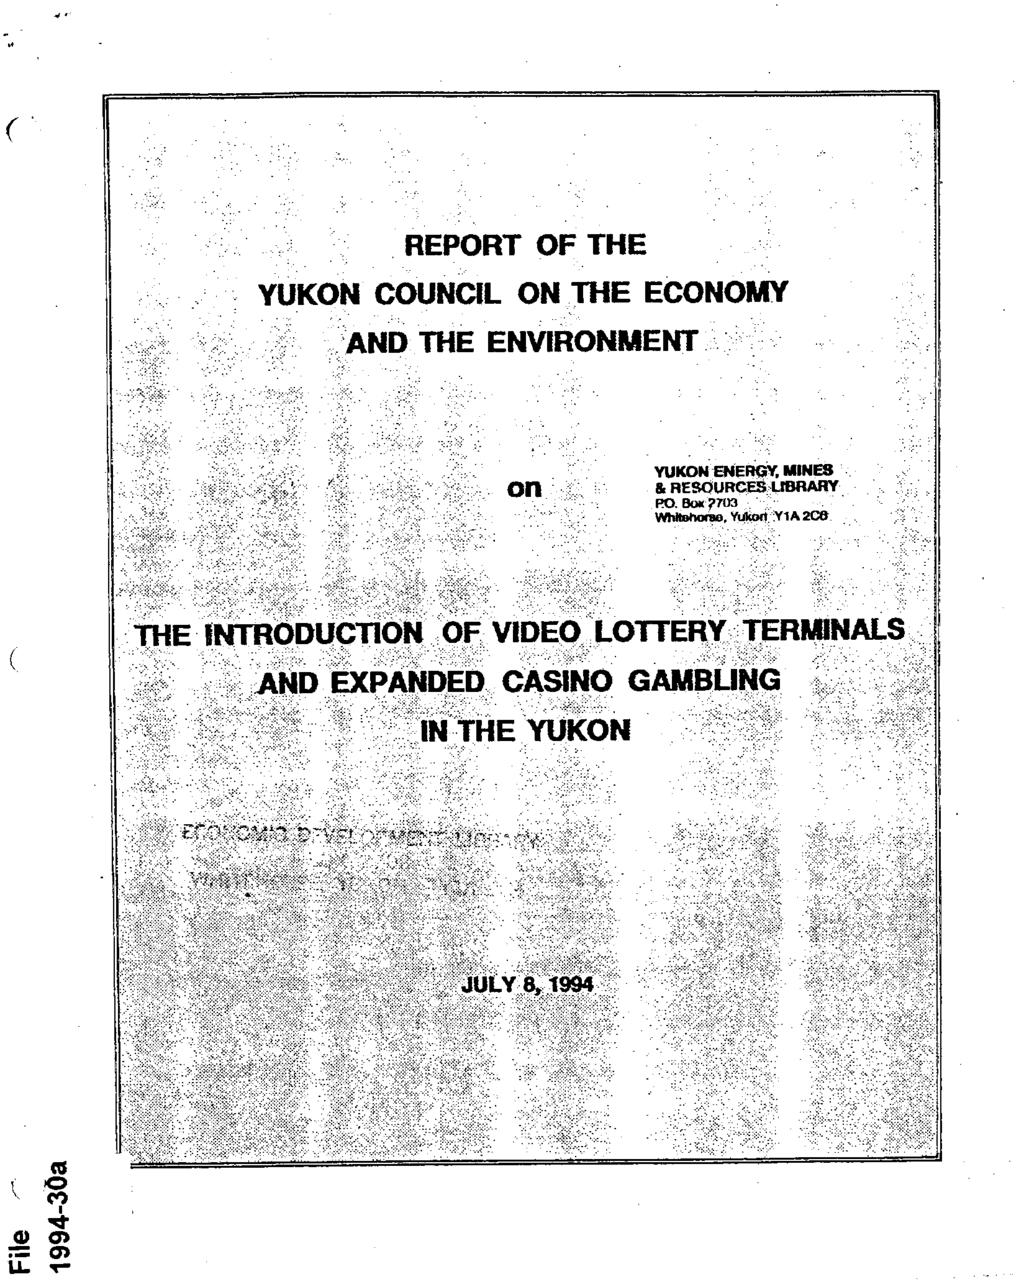 REPORT OF THE YUKON COUNCIL ON THE ECONOMY AND THE ENVIRONMENT Oil YUKON ENERGY. MINES & RESOURCES LIBRARY RO. Bo*?